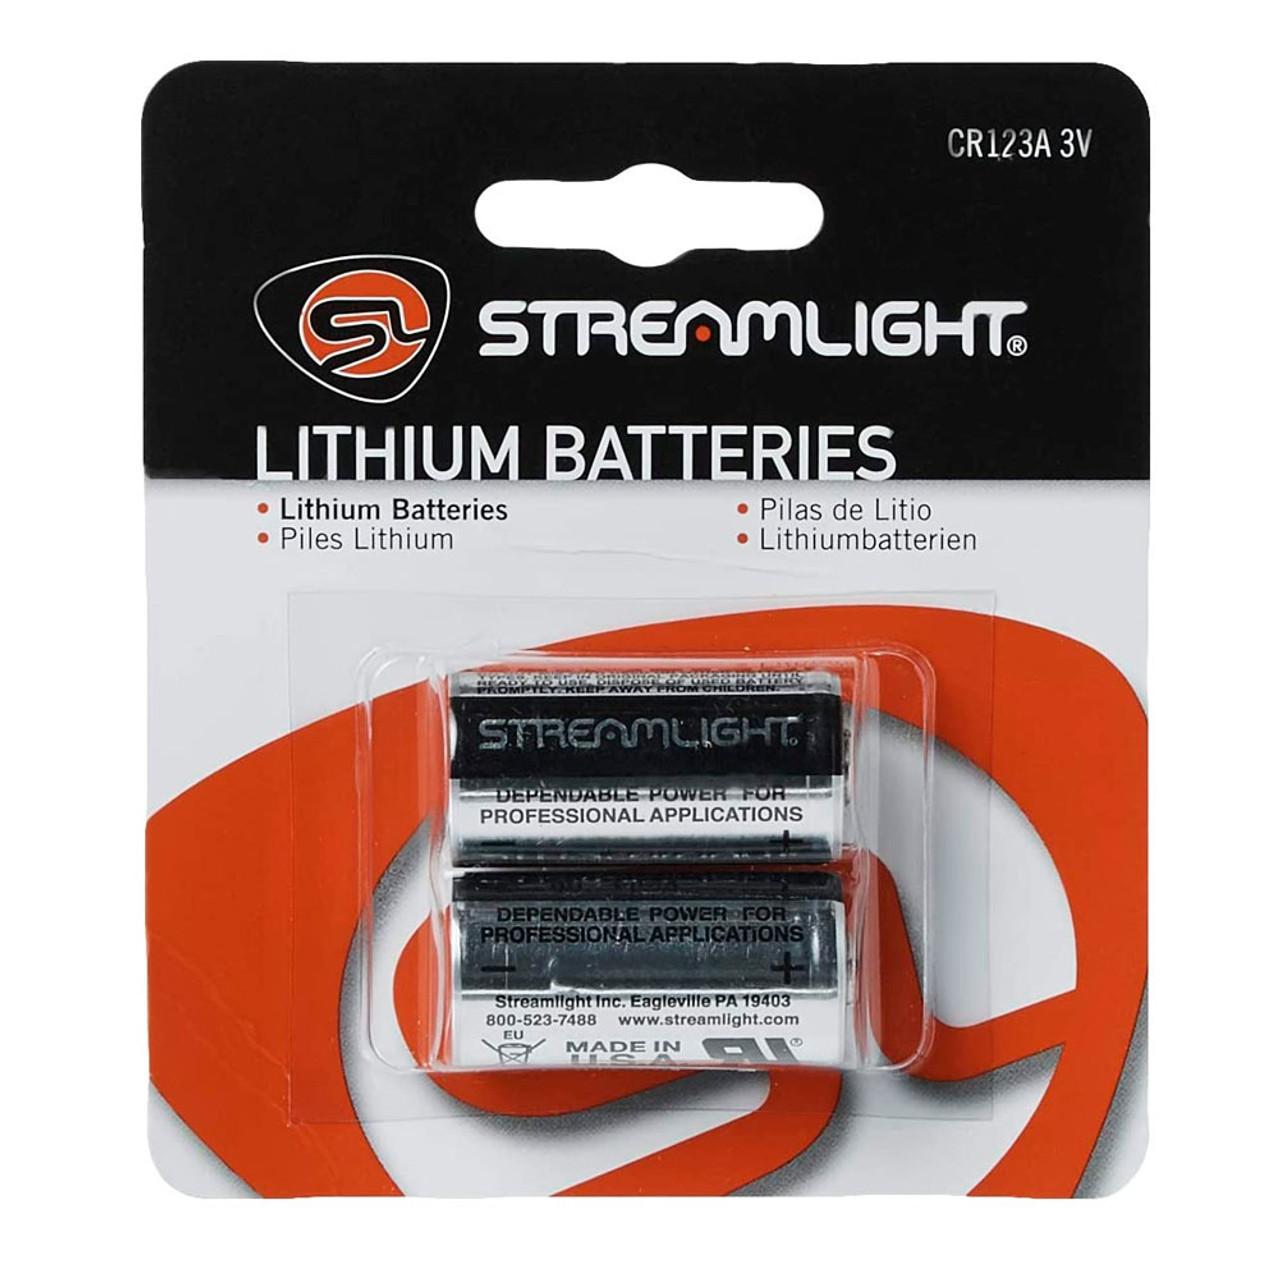 CR123A Lithium Batteries - Browning